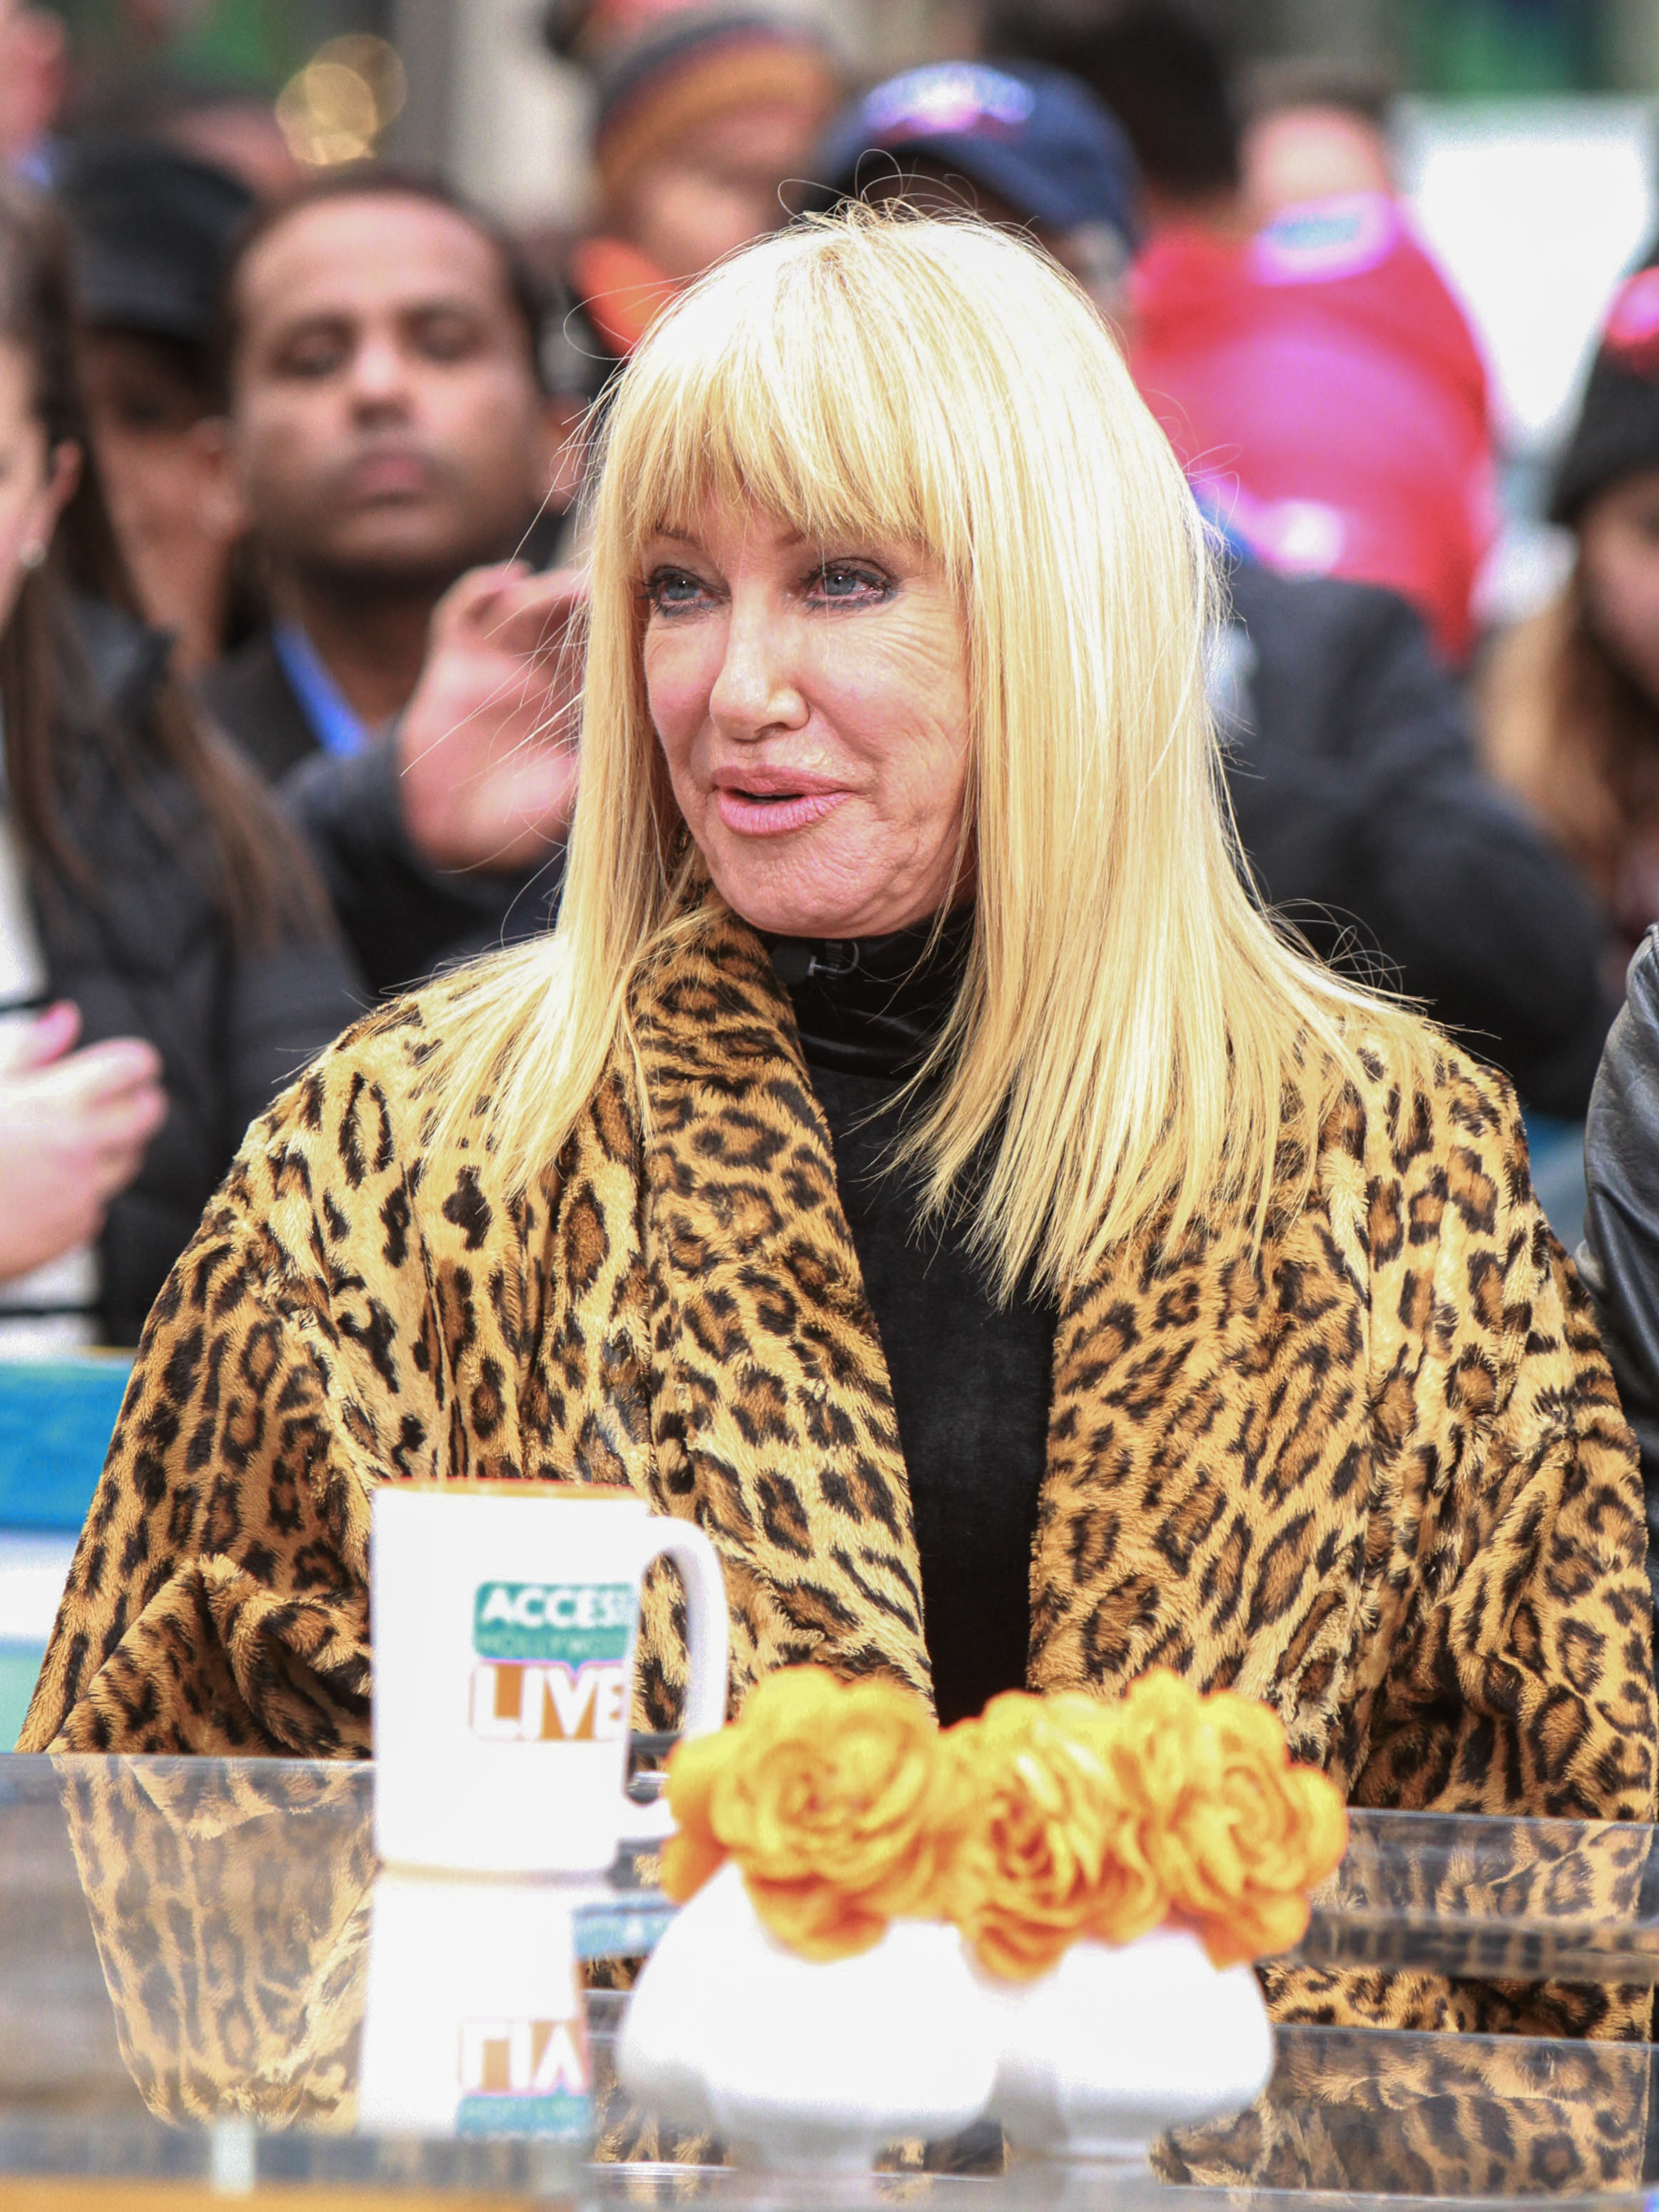 Suzanne Somers bei "Access Hollywood" am 16. November 2017 in New York City | Quelle: Getty Images